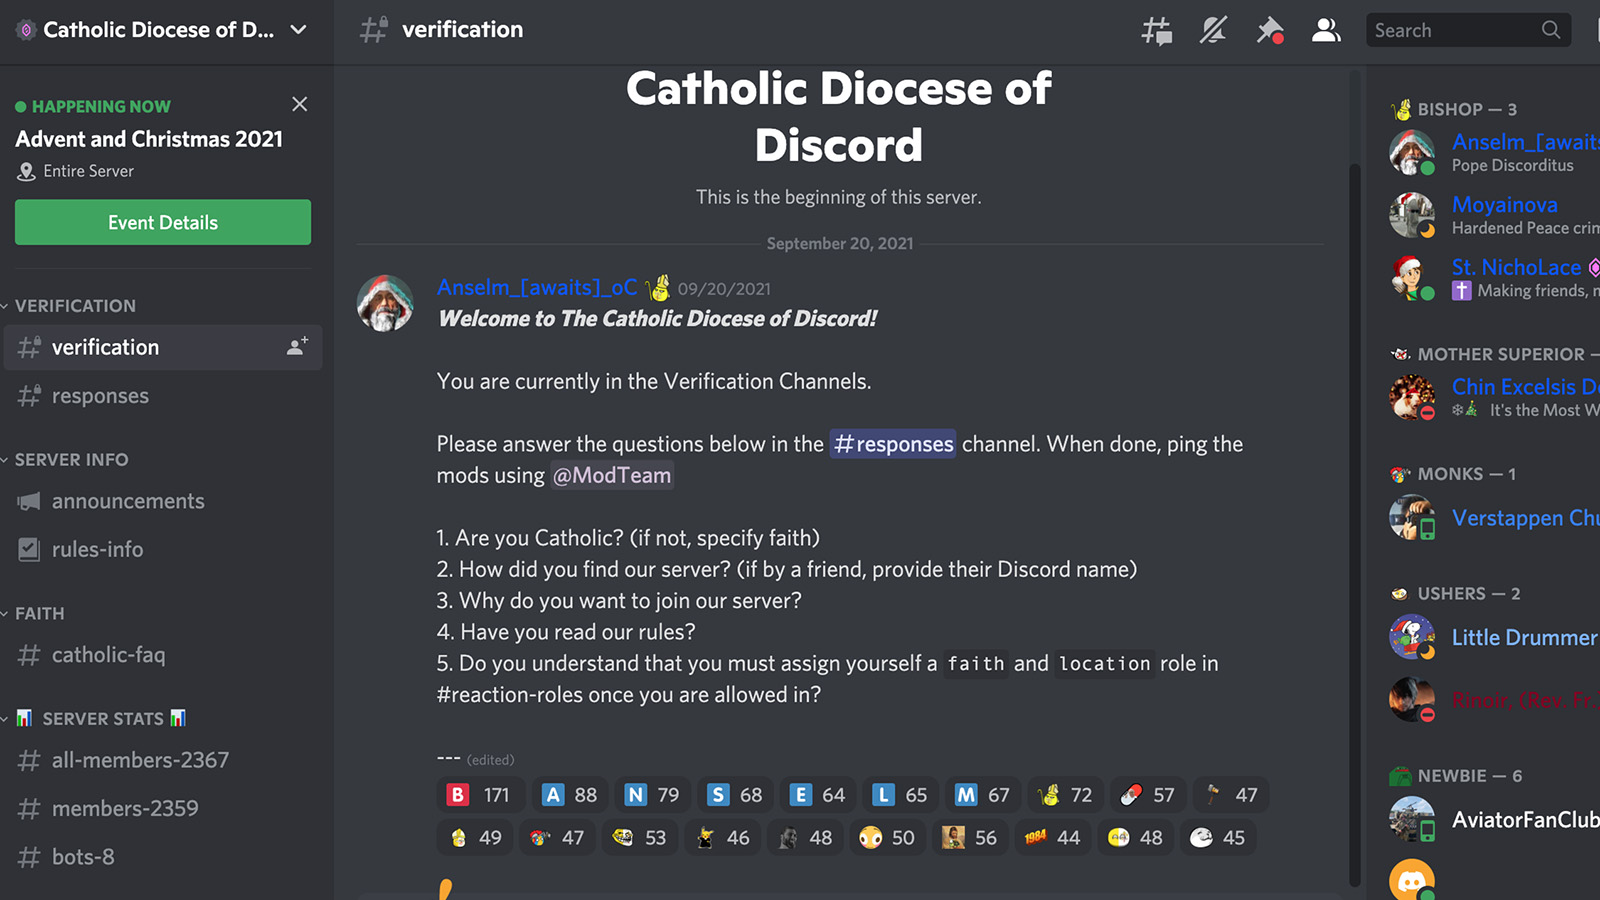 A welcome post from Anselm_oC for The Catholic Diocese of Discord page on Discord. Screengrab